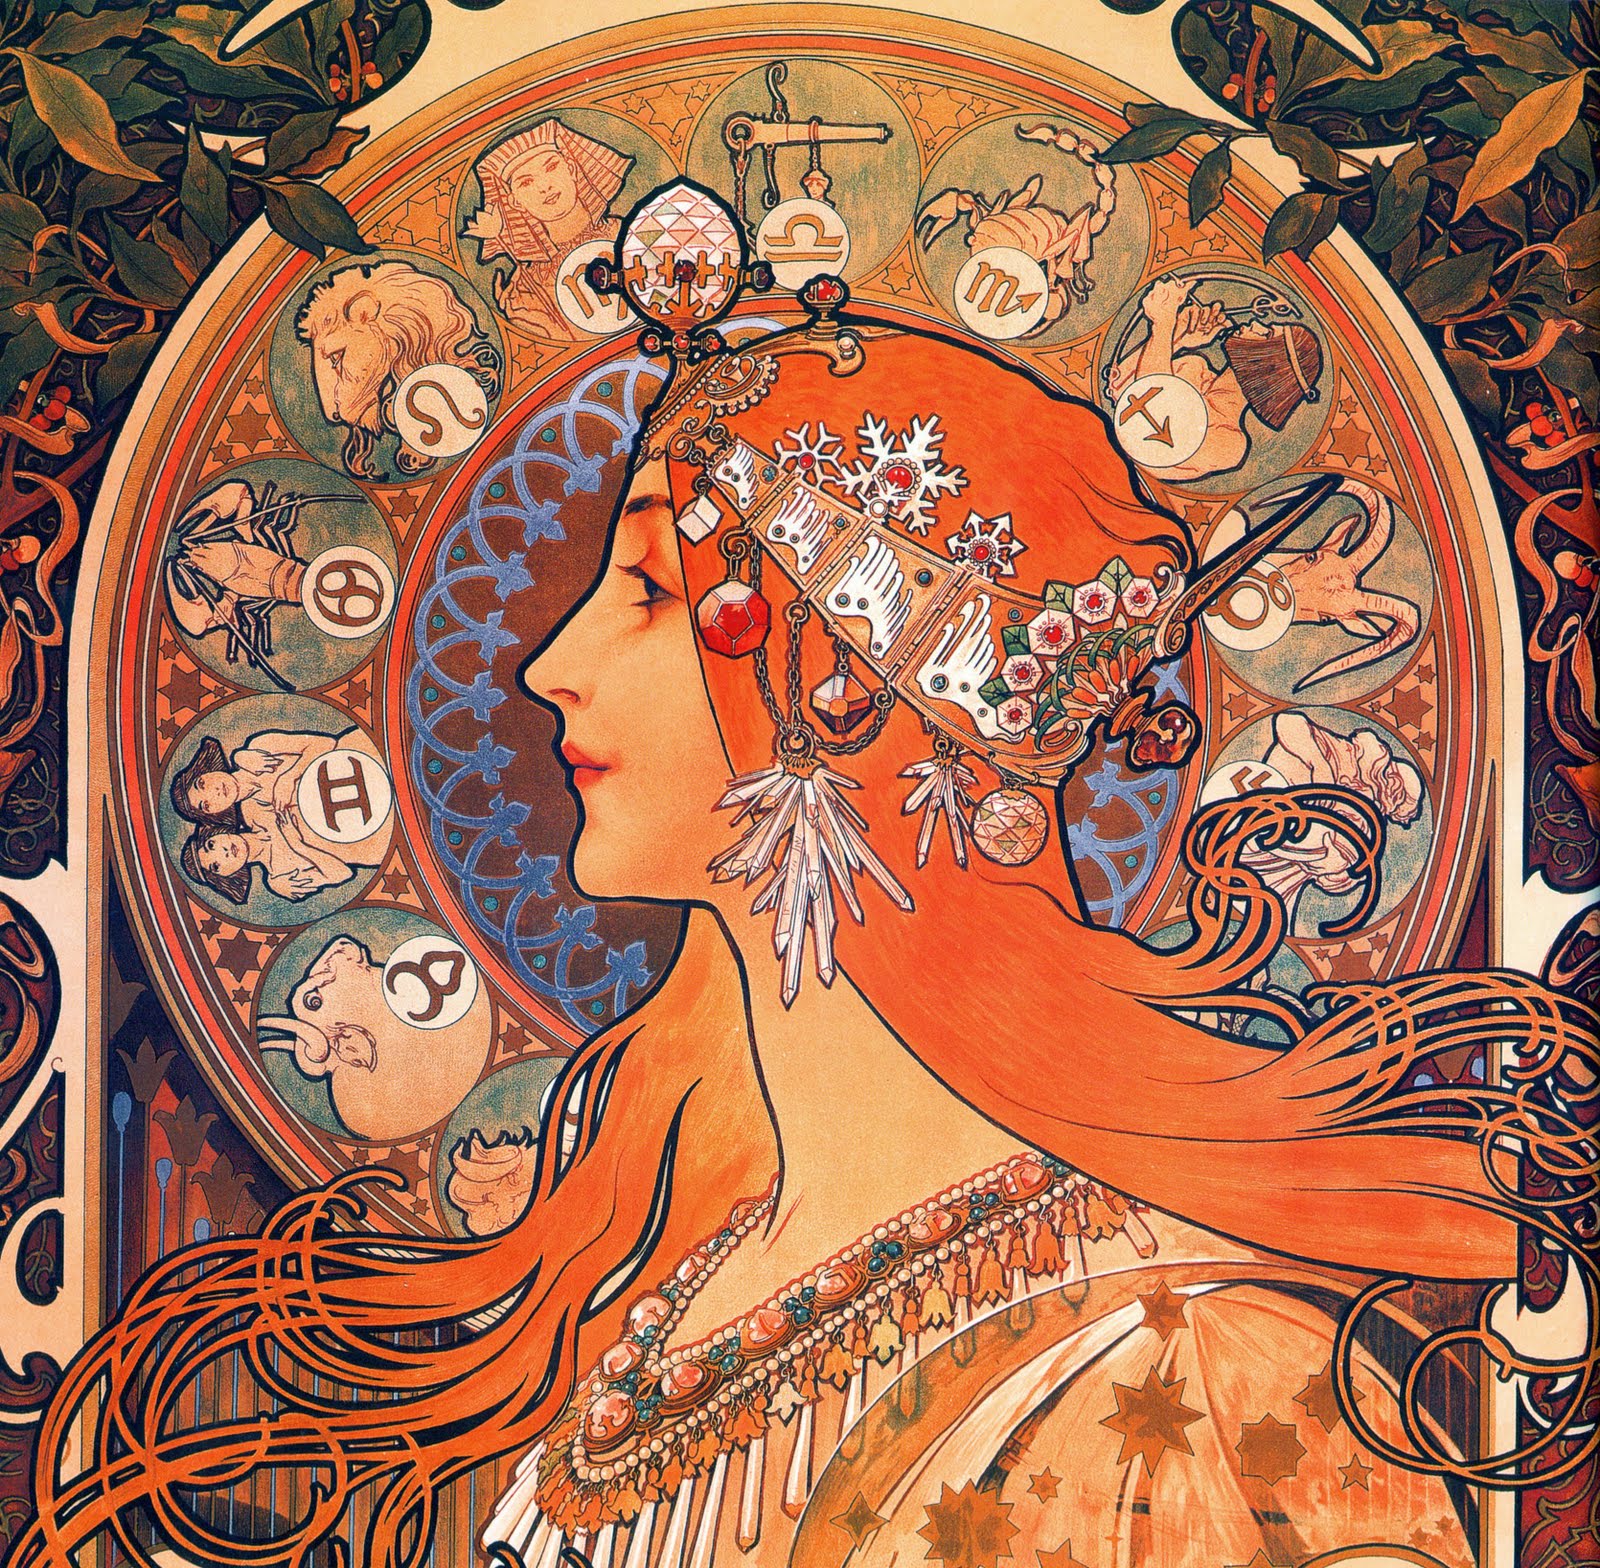 Unhurried Drawings: In love with Mucha